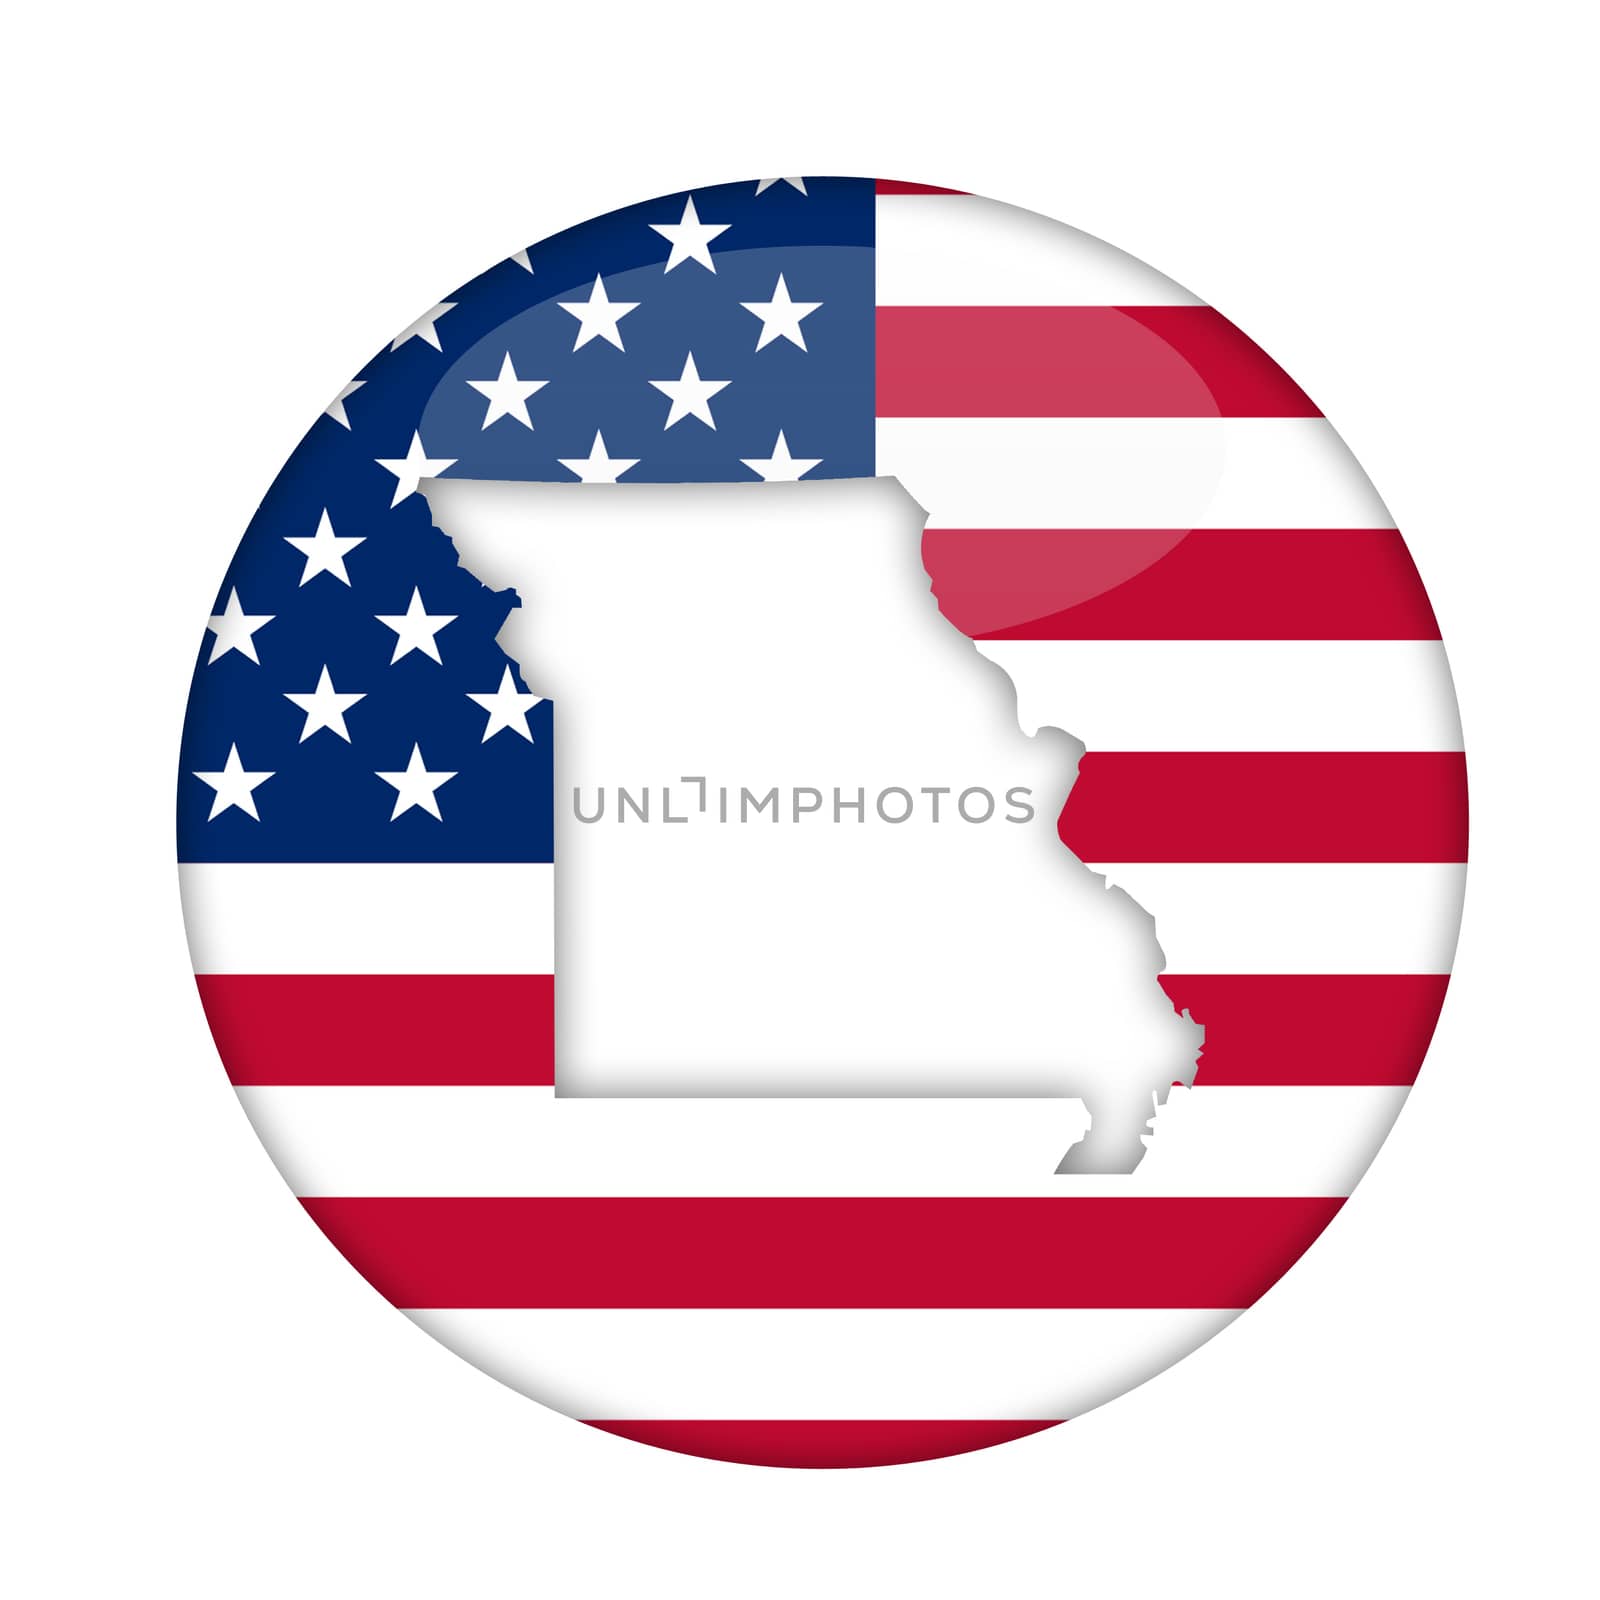 Missouri state of America badge isolated on a white background.